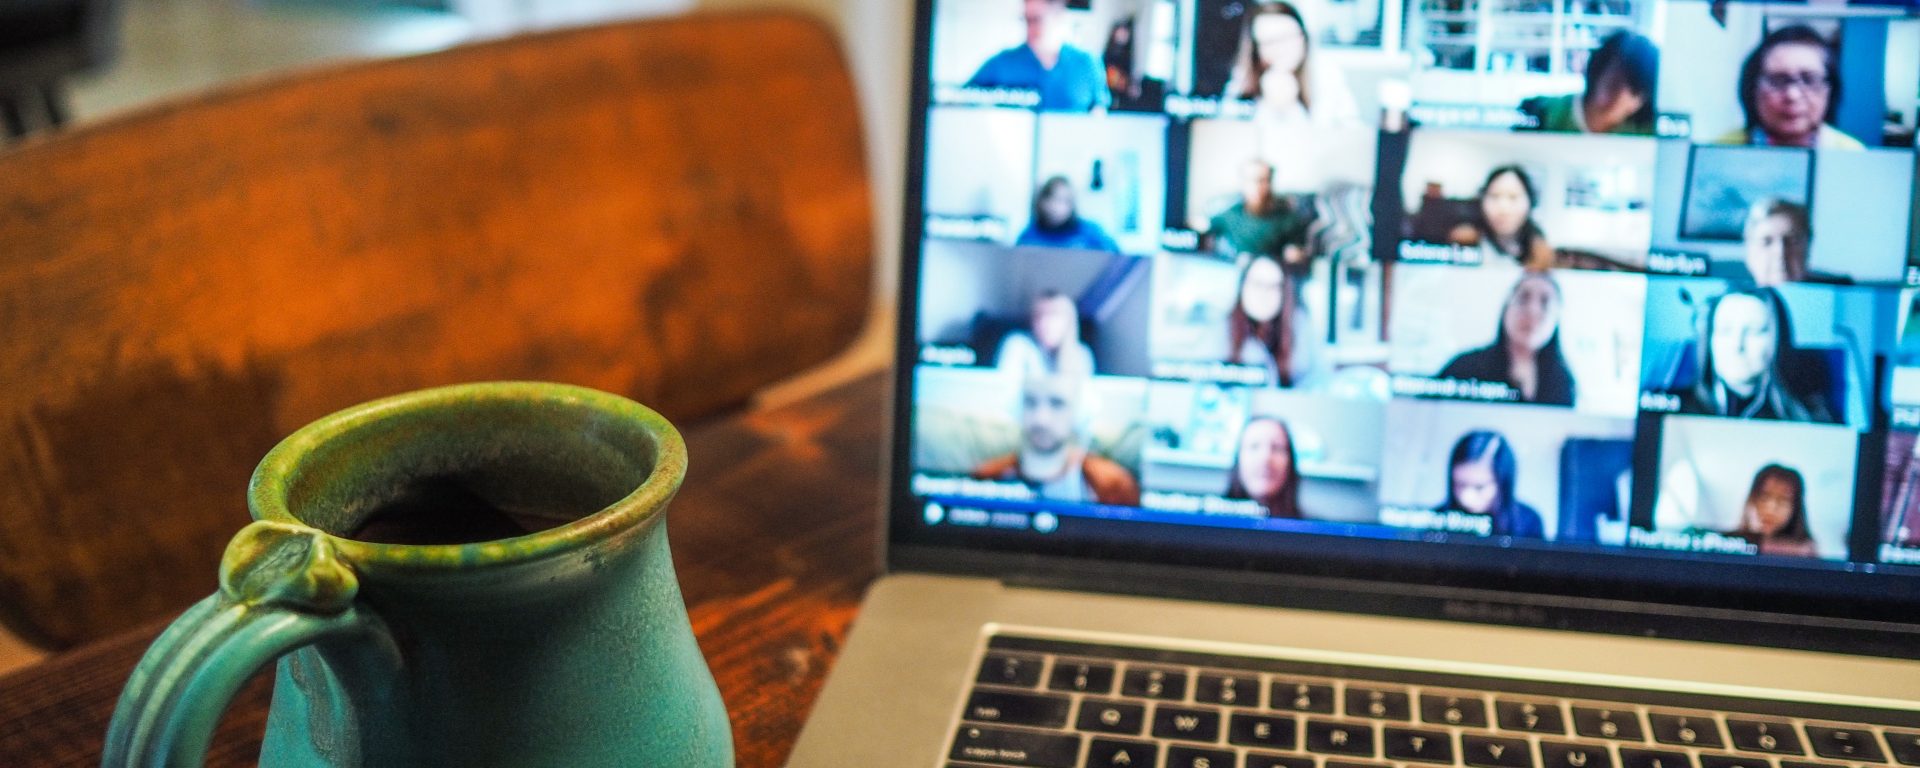 laptop showing many people in small windows on a zoom call with a blue coffe mug to the left